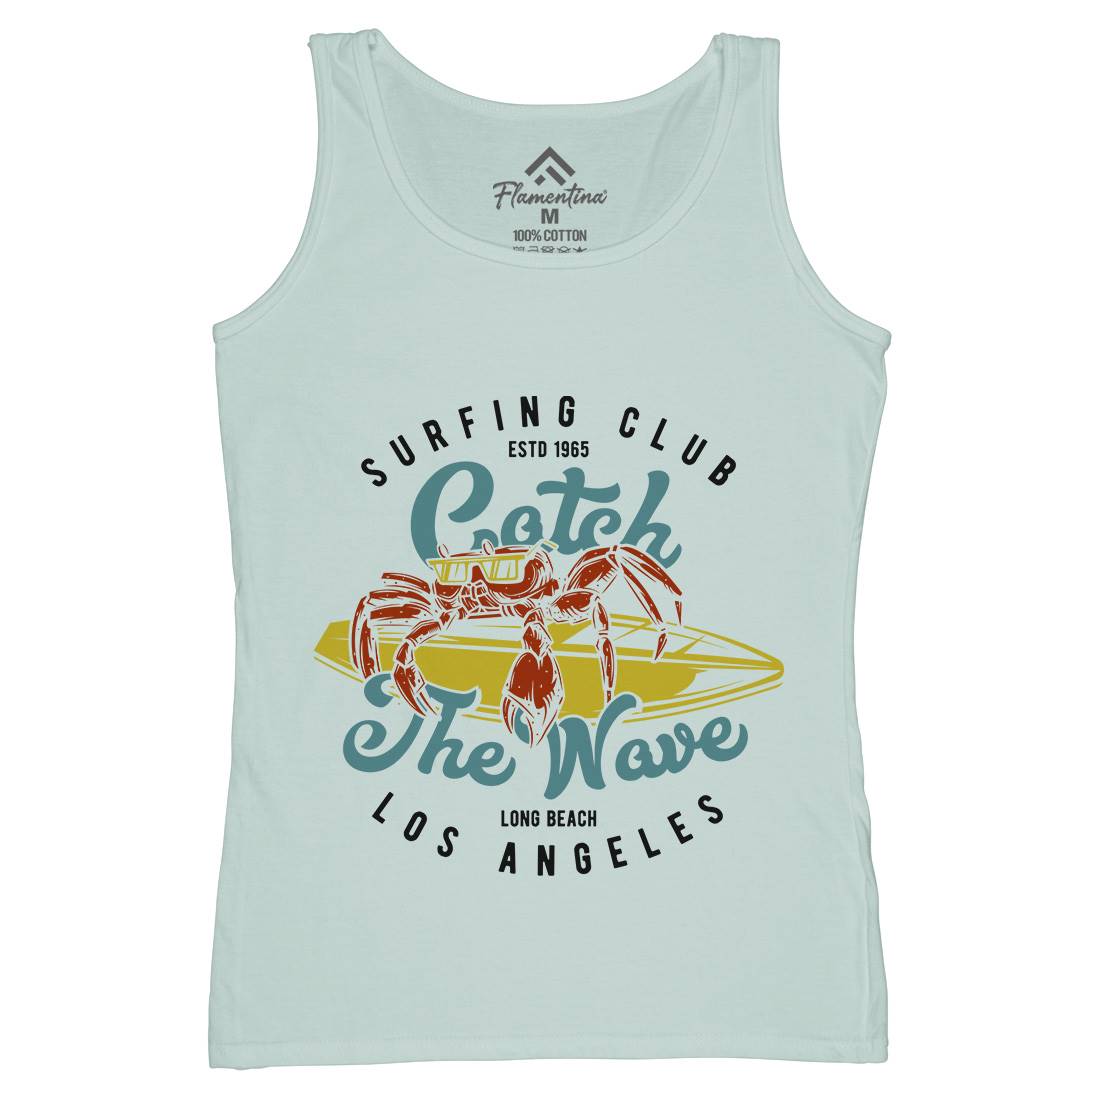 Catch The Wave Surfing Womens Organic Tank Top Vest Surf B877